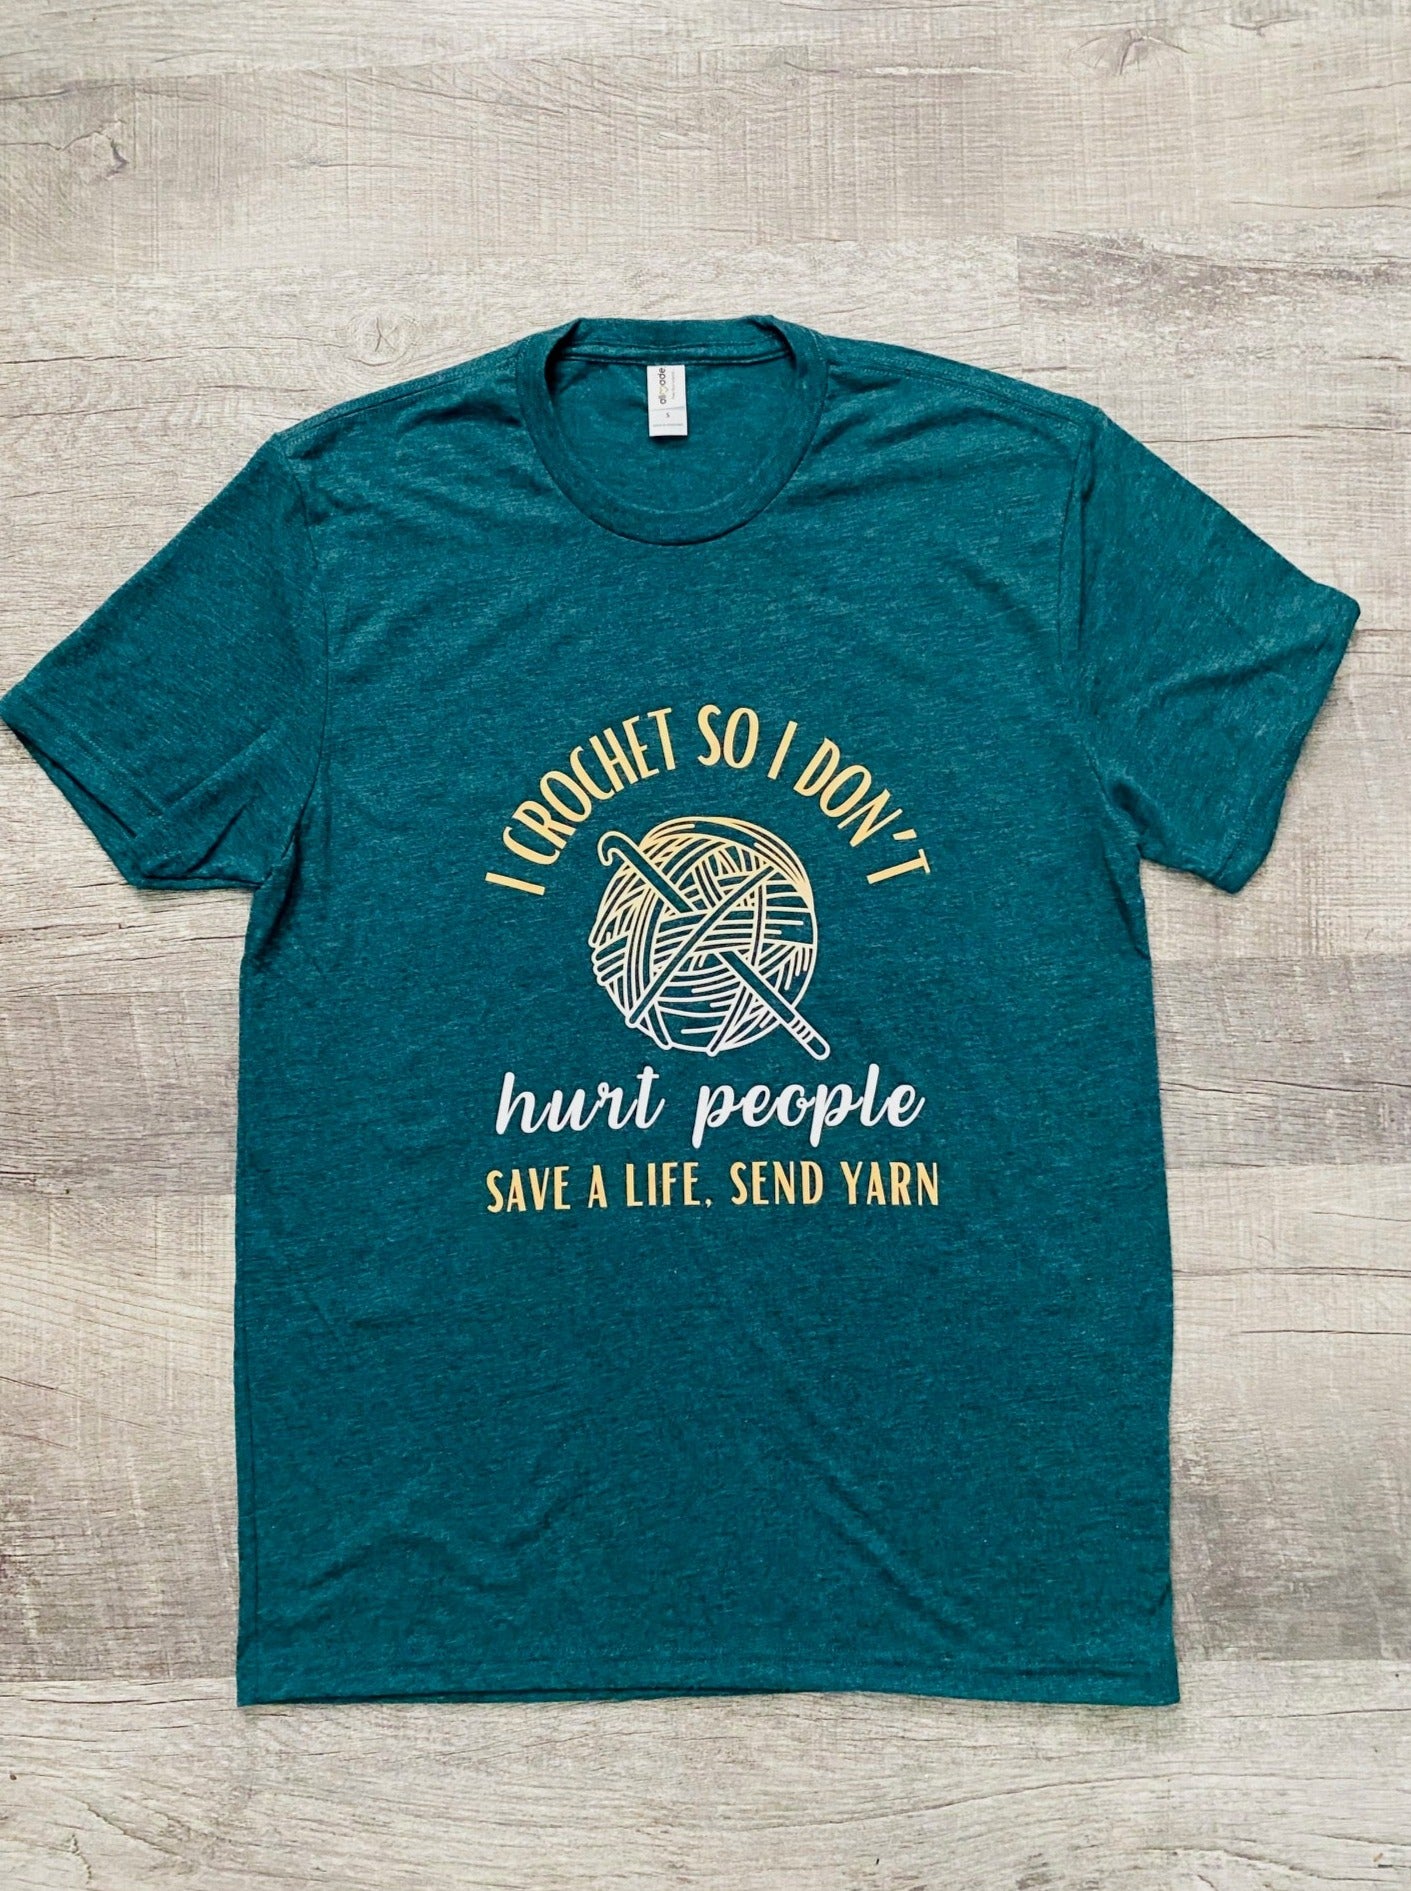 Sea Green short sleeve t-shirt with "I CROCHET SO I DON'T'" at the top in yellow and then a ball of yarn with a crochet hook in the middle that is half yellow and half white. Then below the yarn ball it says "hurt people" in white. At the very bottom it says "SAVE A LIFE, SEND YARN" in yellow. 